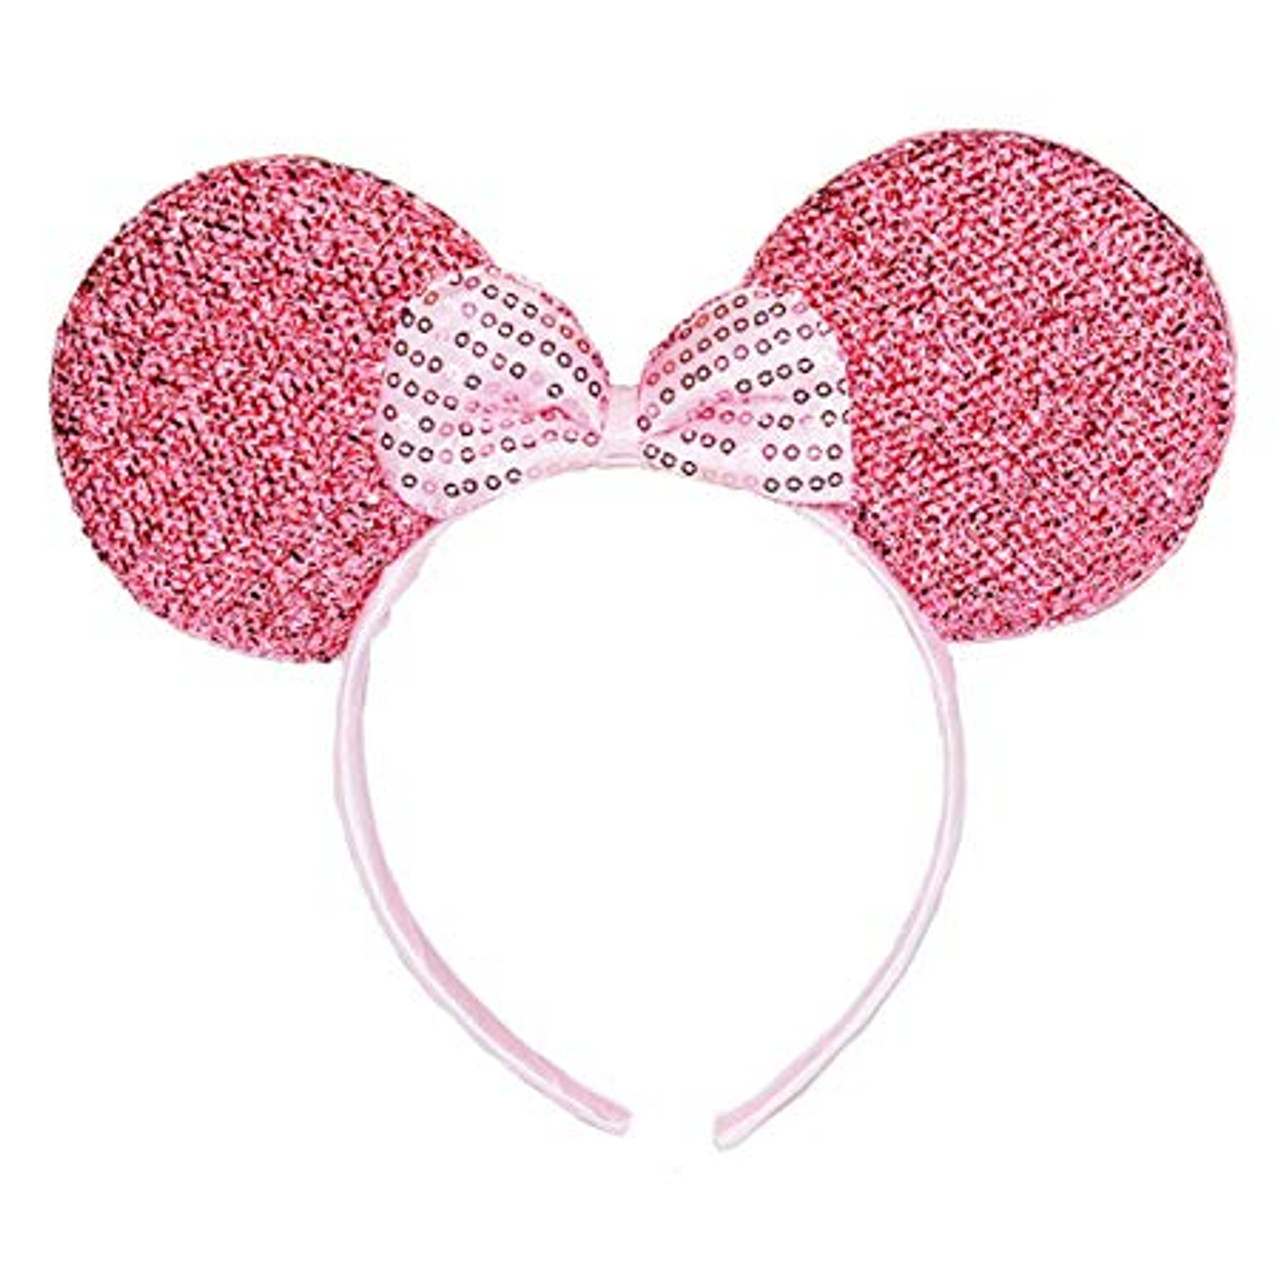 Which Minnie Mouse ears should I pack? #minniemouseears #disneytrip202, Minnie Mouse